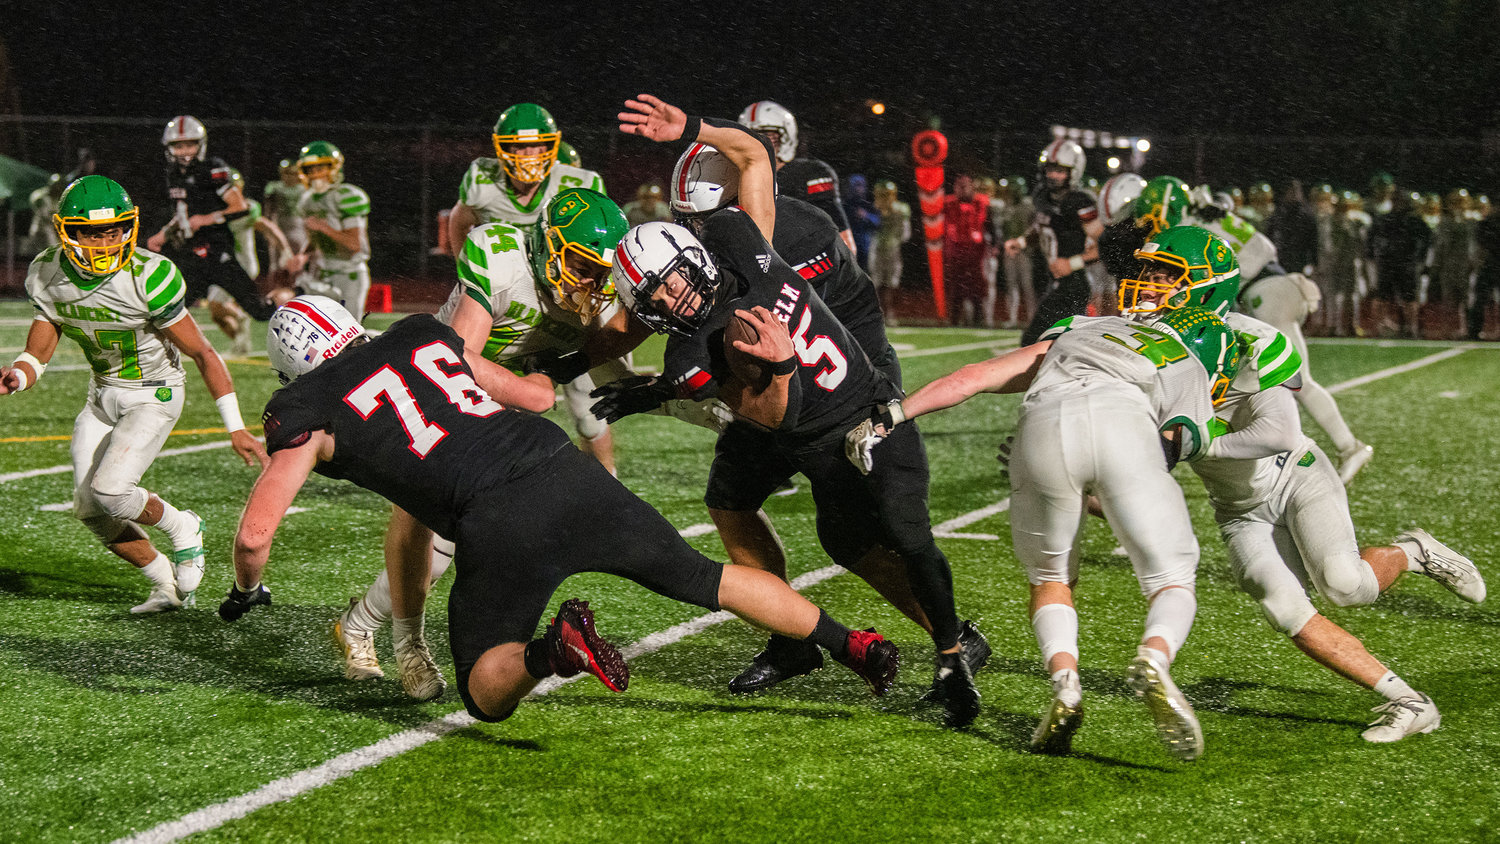 Yelm senior Kyler Ronquillo (5) runs with the football during a game against the Bishop Blanchet Bears on Friday, Nov. 4.